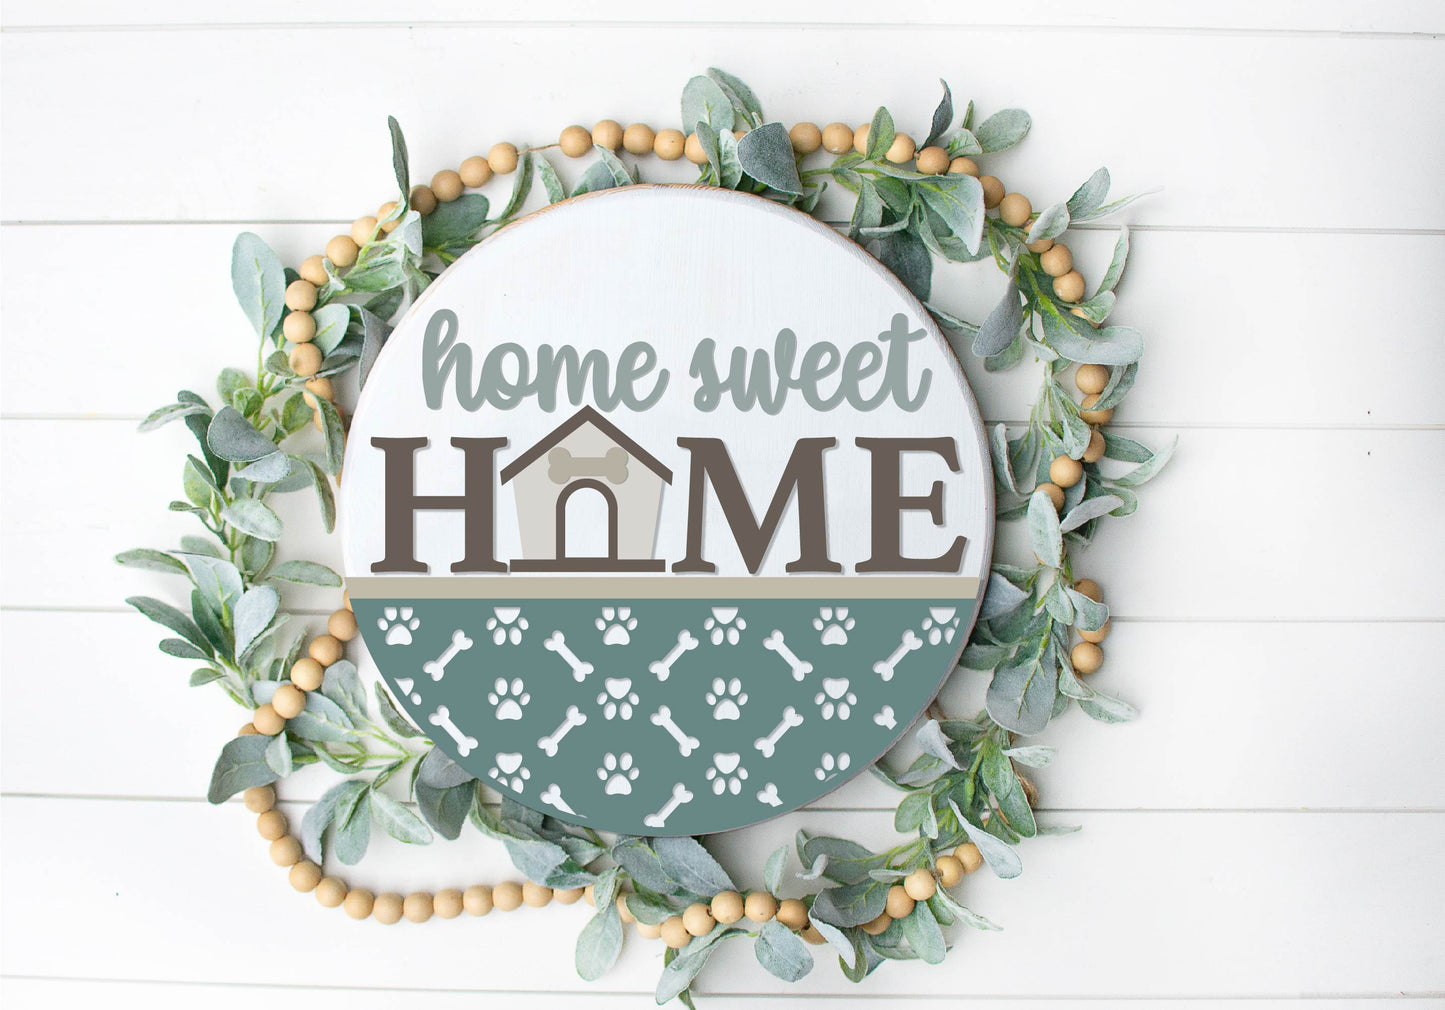 Home sweet home dog house sign